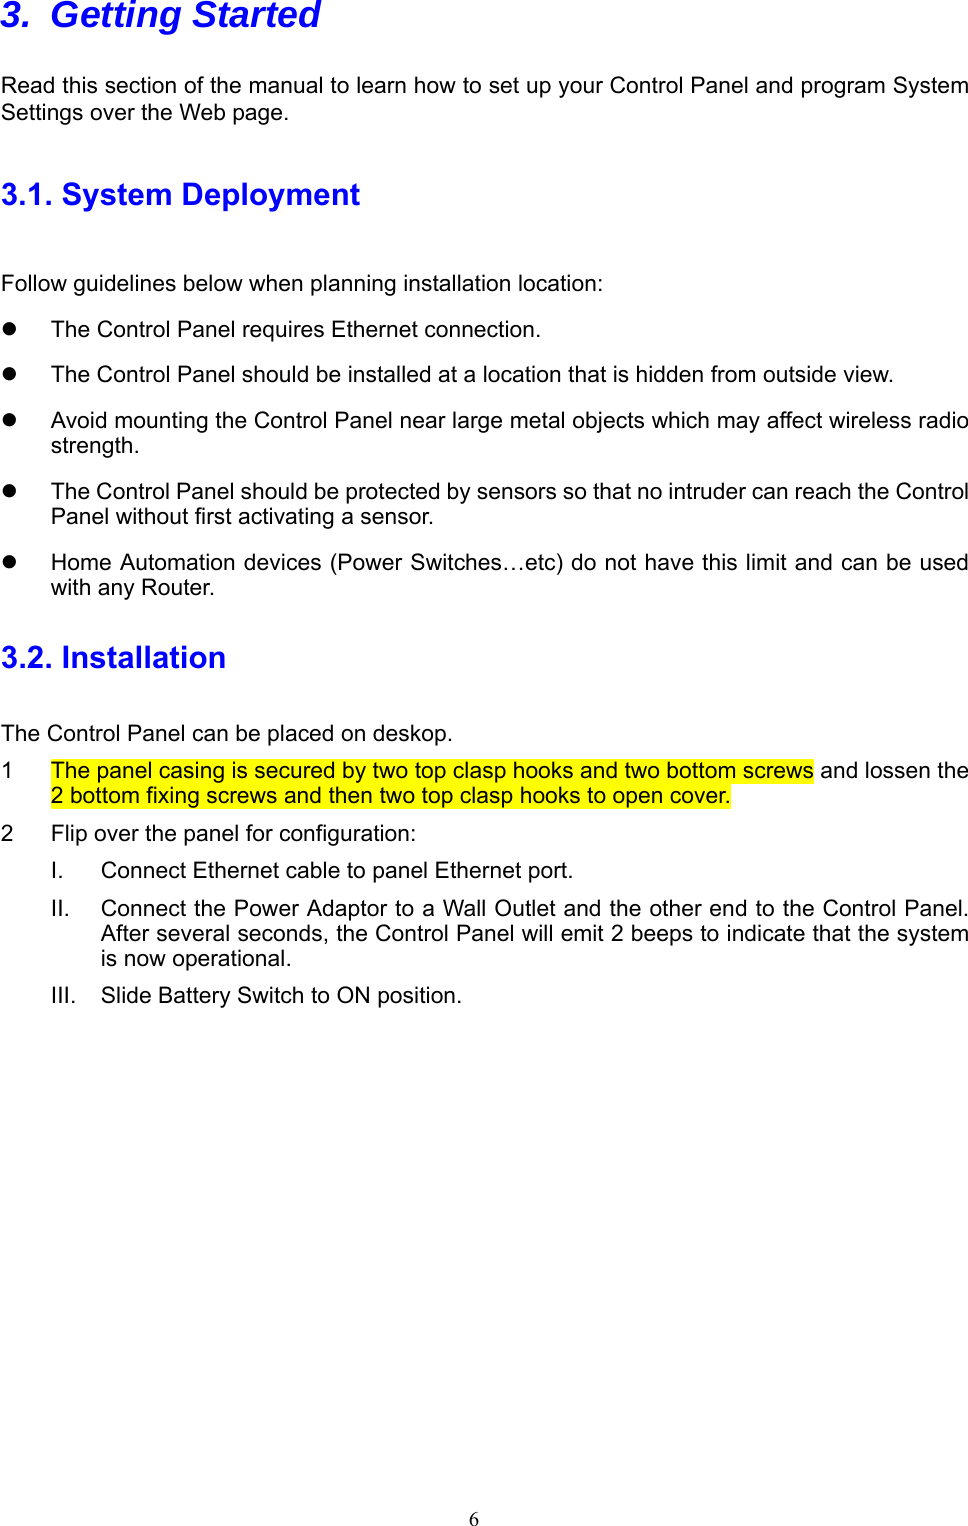  6 3. Getting Started   Read this section of the manual to learn how to set up your Control Panel and program System Settings over the Web page.   3.1. System Deployment Follow guidelines below when planning installation location:   The Control Panel requires Ethernet connection.   The Control Panel should be installed at a location that is hidden from outside view.   Avoid mounting the Control Panel near large metal objects which may affect wireless radio strength.   The Control Panel should be protected by sensors so that no intruder can reach the Control Panel without first activating a sensor.   Home Automation devices (Power Switches…etc) do not have this limit and can be used with any Router. 3.2. Installation   The Control Panel can be placed on deskop. 1  The panel casing is secured by two top clasp hooks and two bottom screws and lossen the 2 bottom fixing screws and then two top clasp hooks to open cover.   2  Flip over the panel for configuration: I.  Connect Ethernet cable to panel Ethernet port. II.  Connect the Power Adaptor to a Wall Outlet and the other end to the Control Panel. After several seconds, the Control Panel will emit 2 beeps to indicate that the system is now operational. III.  Slide Battery Switch to ON position.  